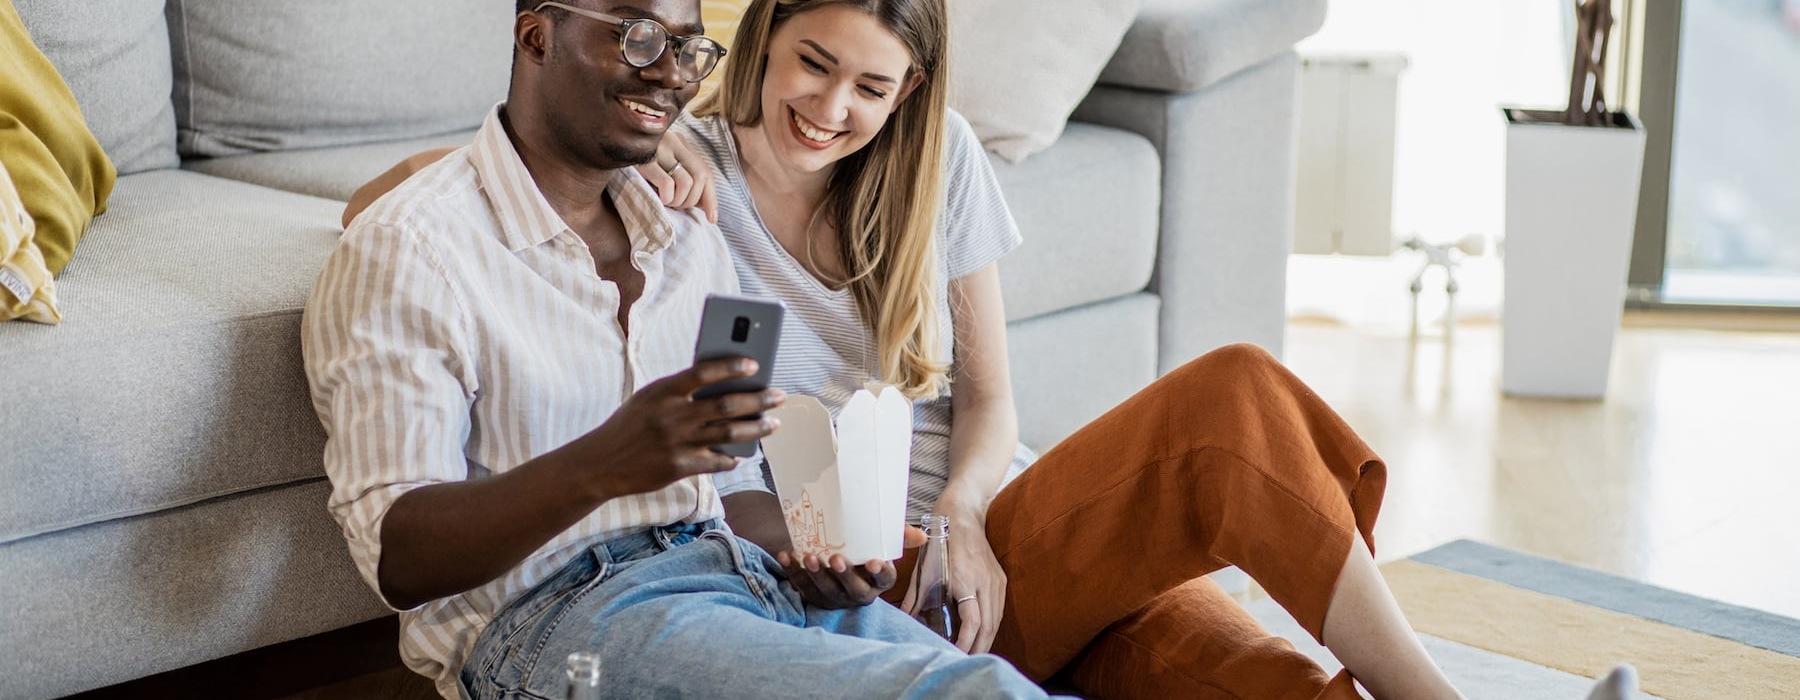 lifestyle image of a couple interacting over a video call in a bright living area